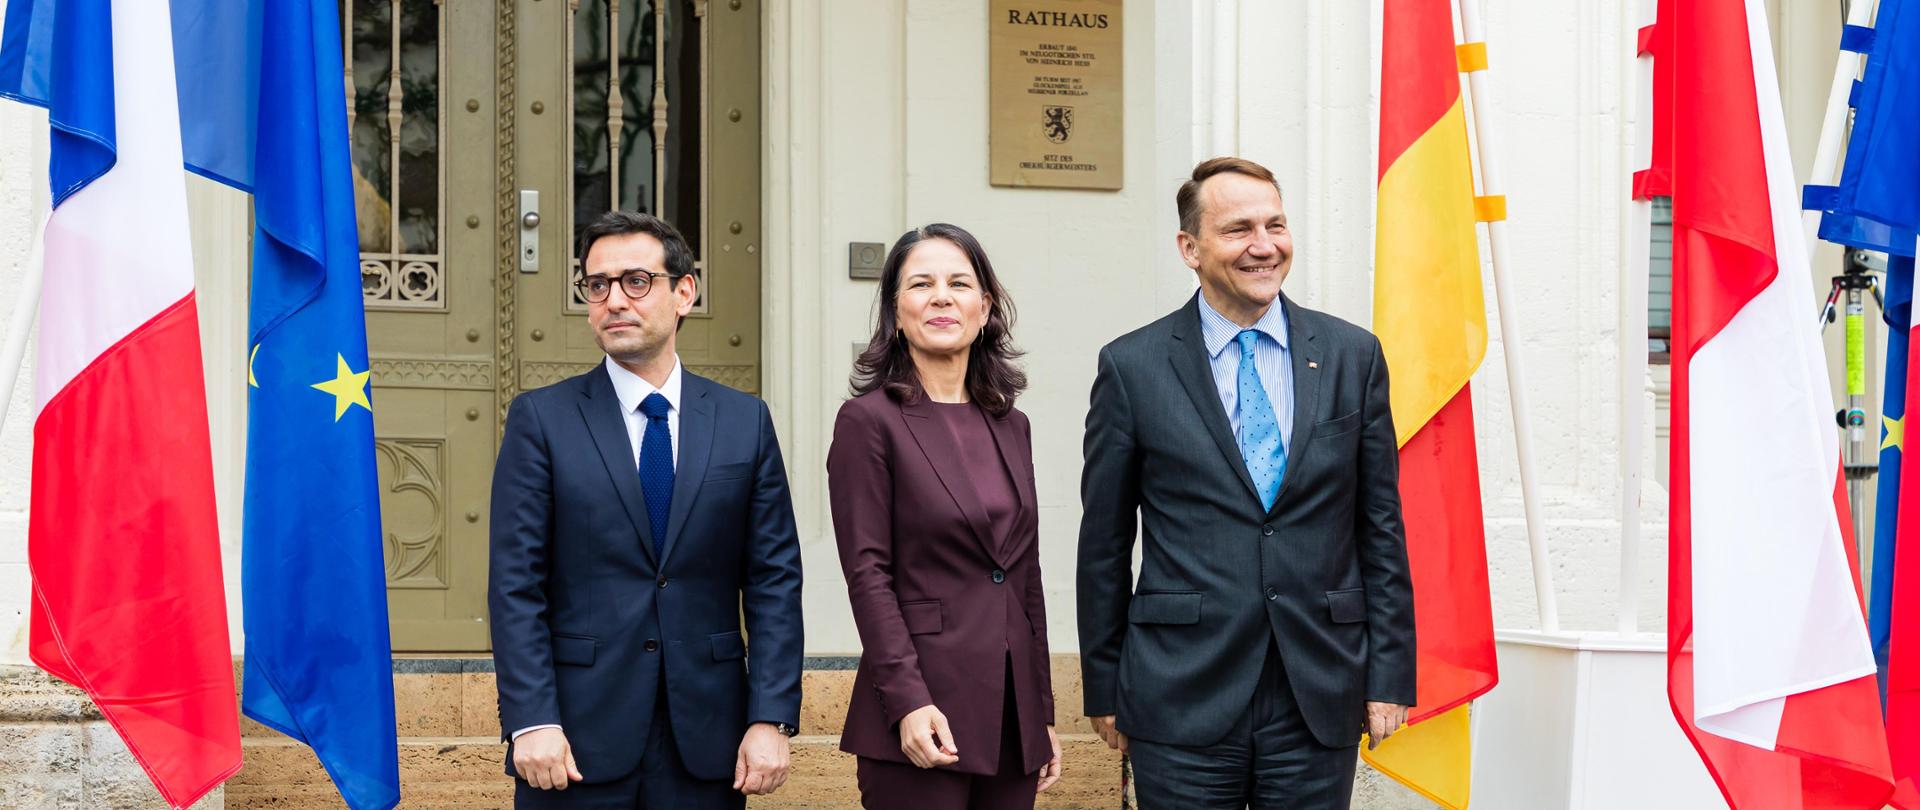 On 22 May, Minister Radosław Sikorski met in Weimar with his counterparts from France and Germany, Stéphane Séjourné and Annalena Baerbock